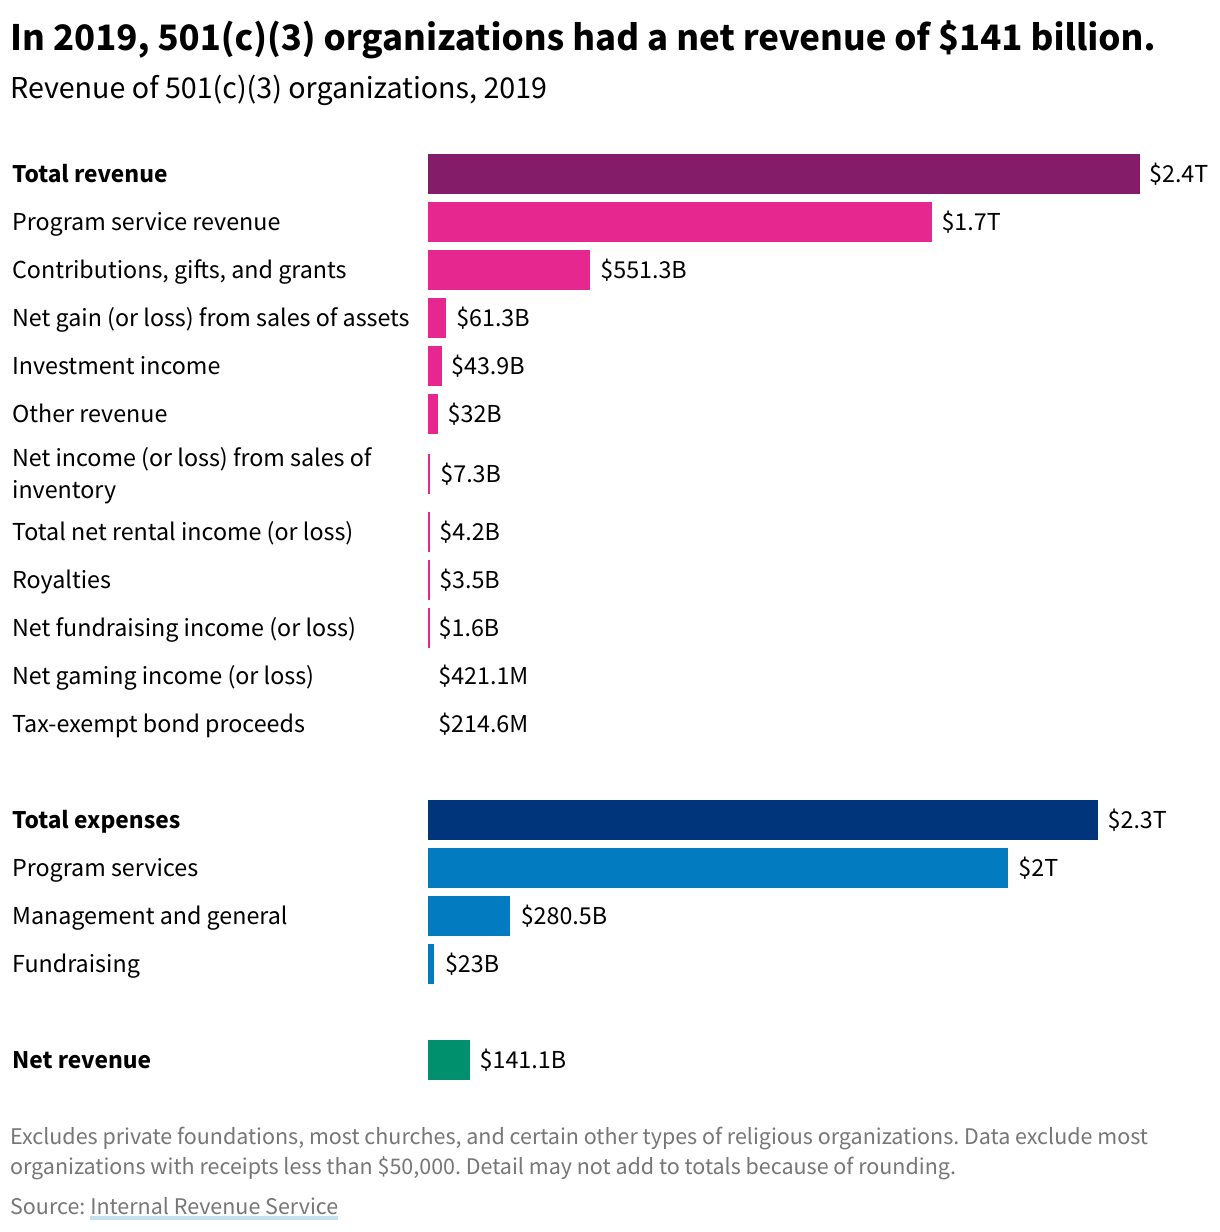 Bar chart showing the revenue, expenses, and net revenue of 501(c)(3) organizations in 2019.